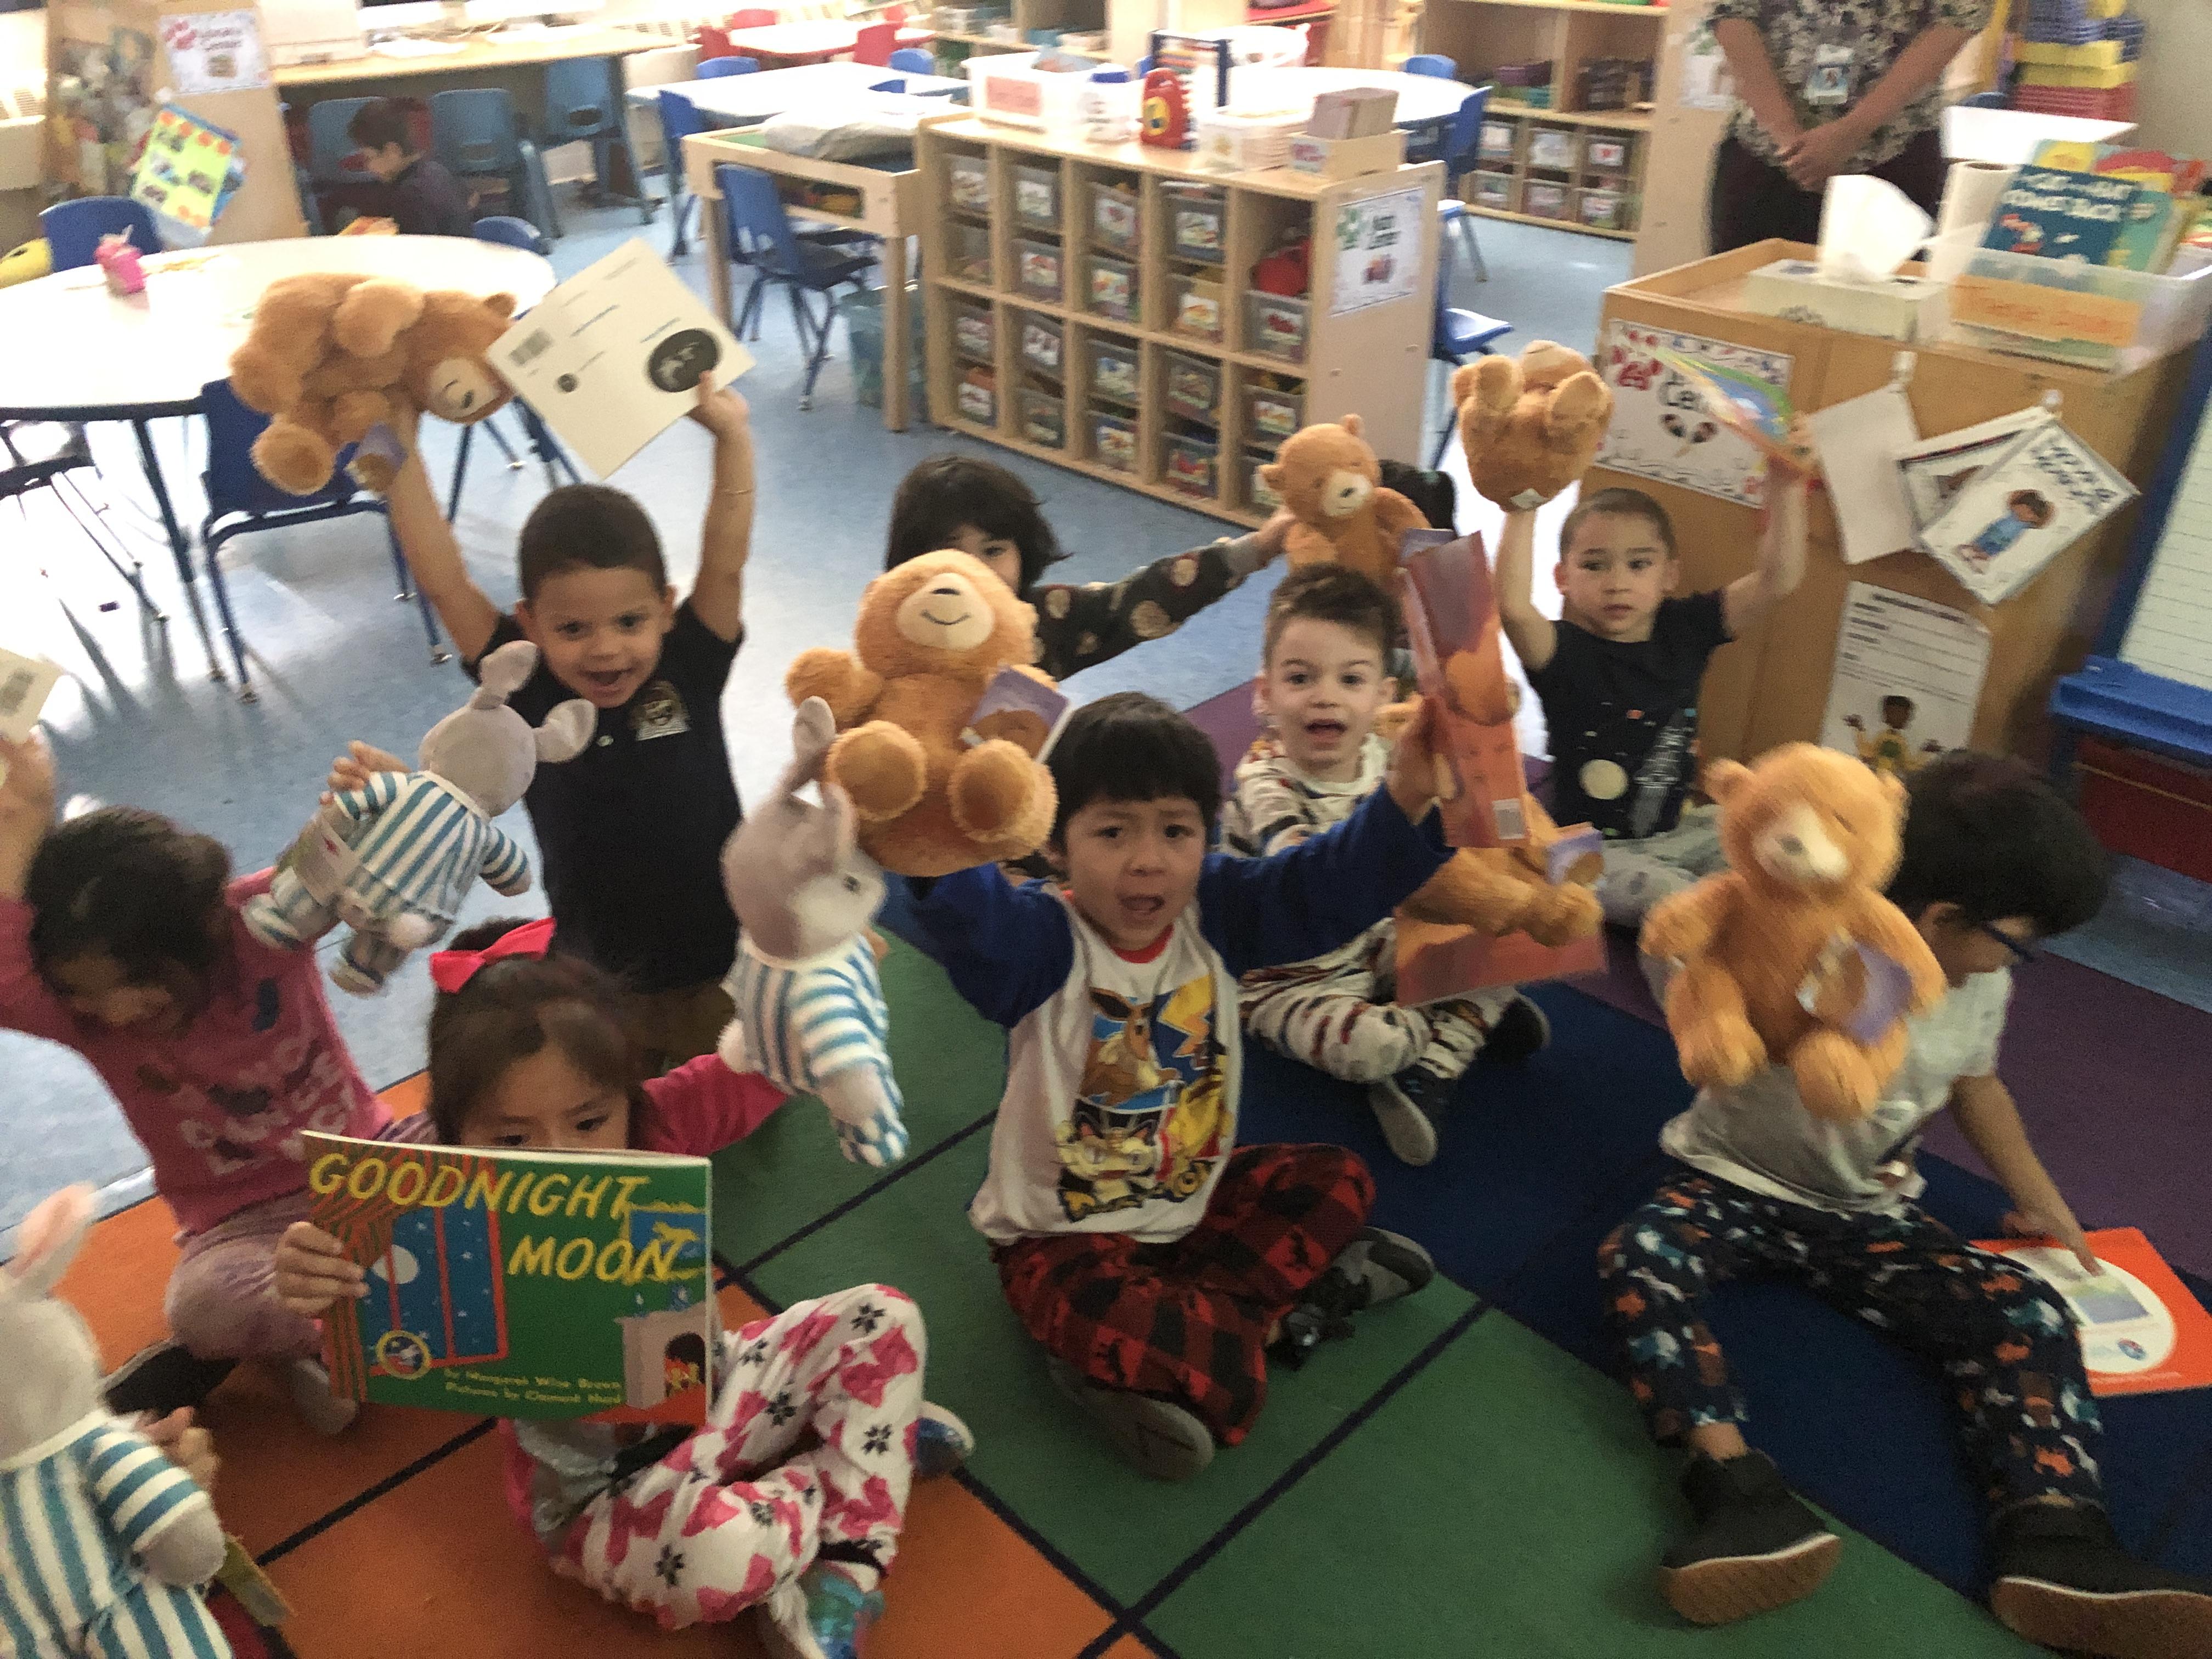 kids wearing pj's sitting on the class rug happily holding up their books and stuffed animals friends